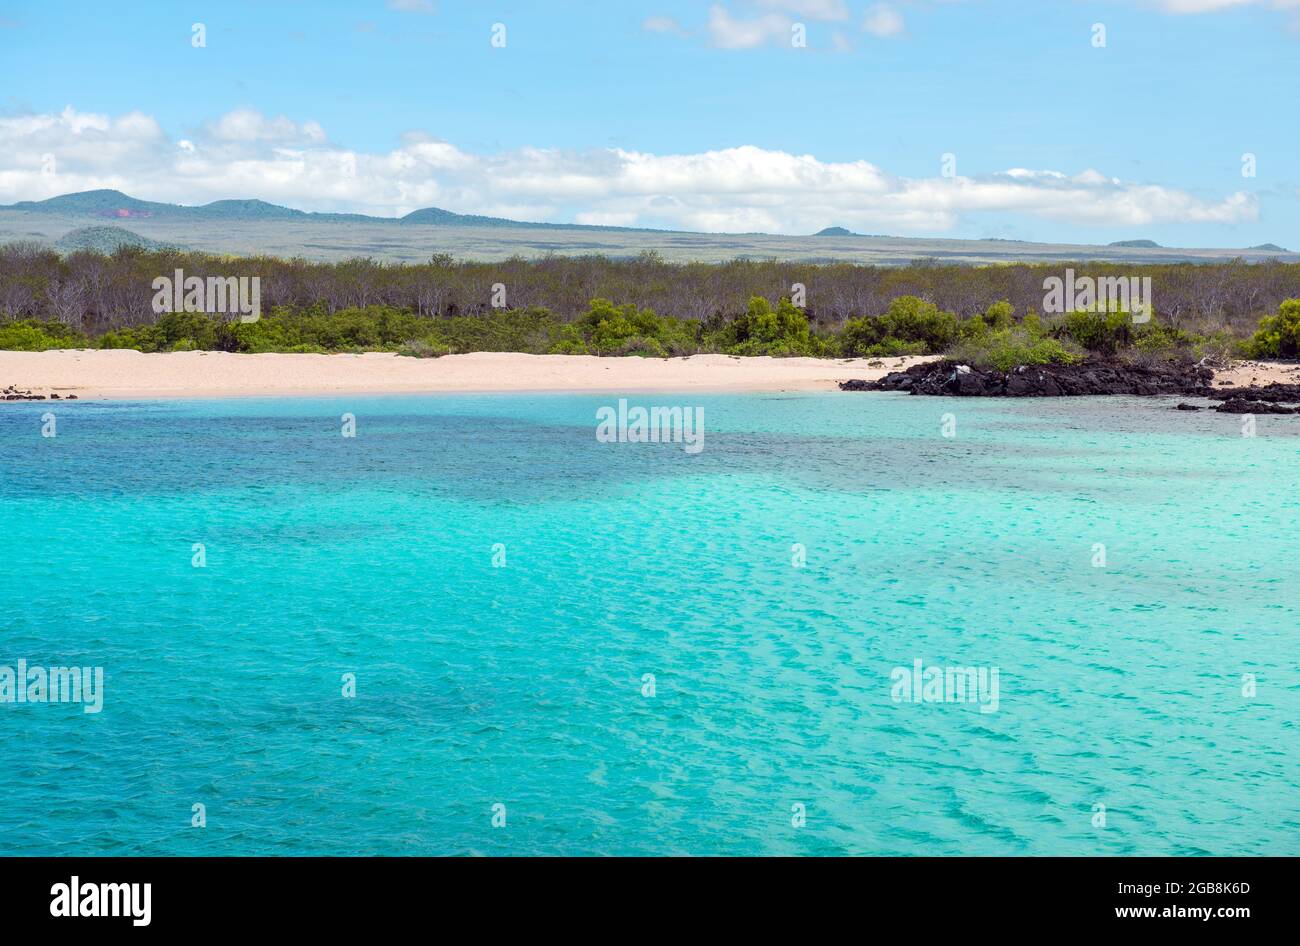 Galapagos coral reef and beach by North Seymour Island famous for snorkeling, Galapagos national park, Ecuador. Stock Photo